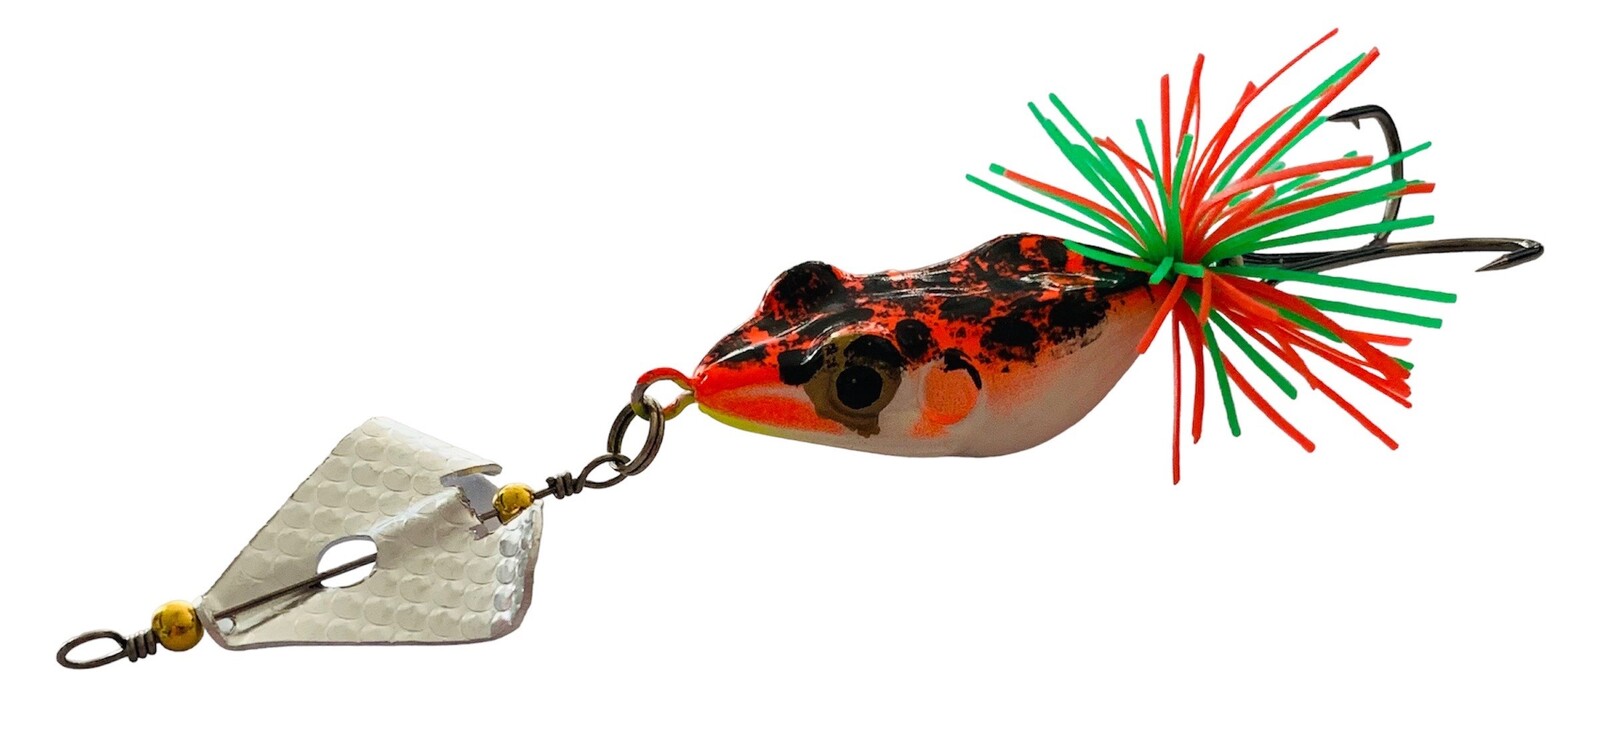 Multiple Variations of Thunder Frog Top Water Whopper Poppers for Sale, Afishlure